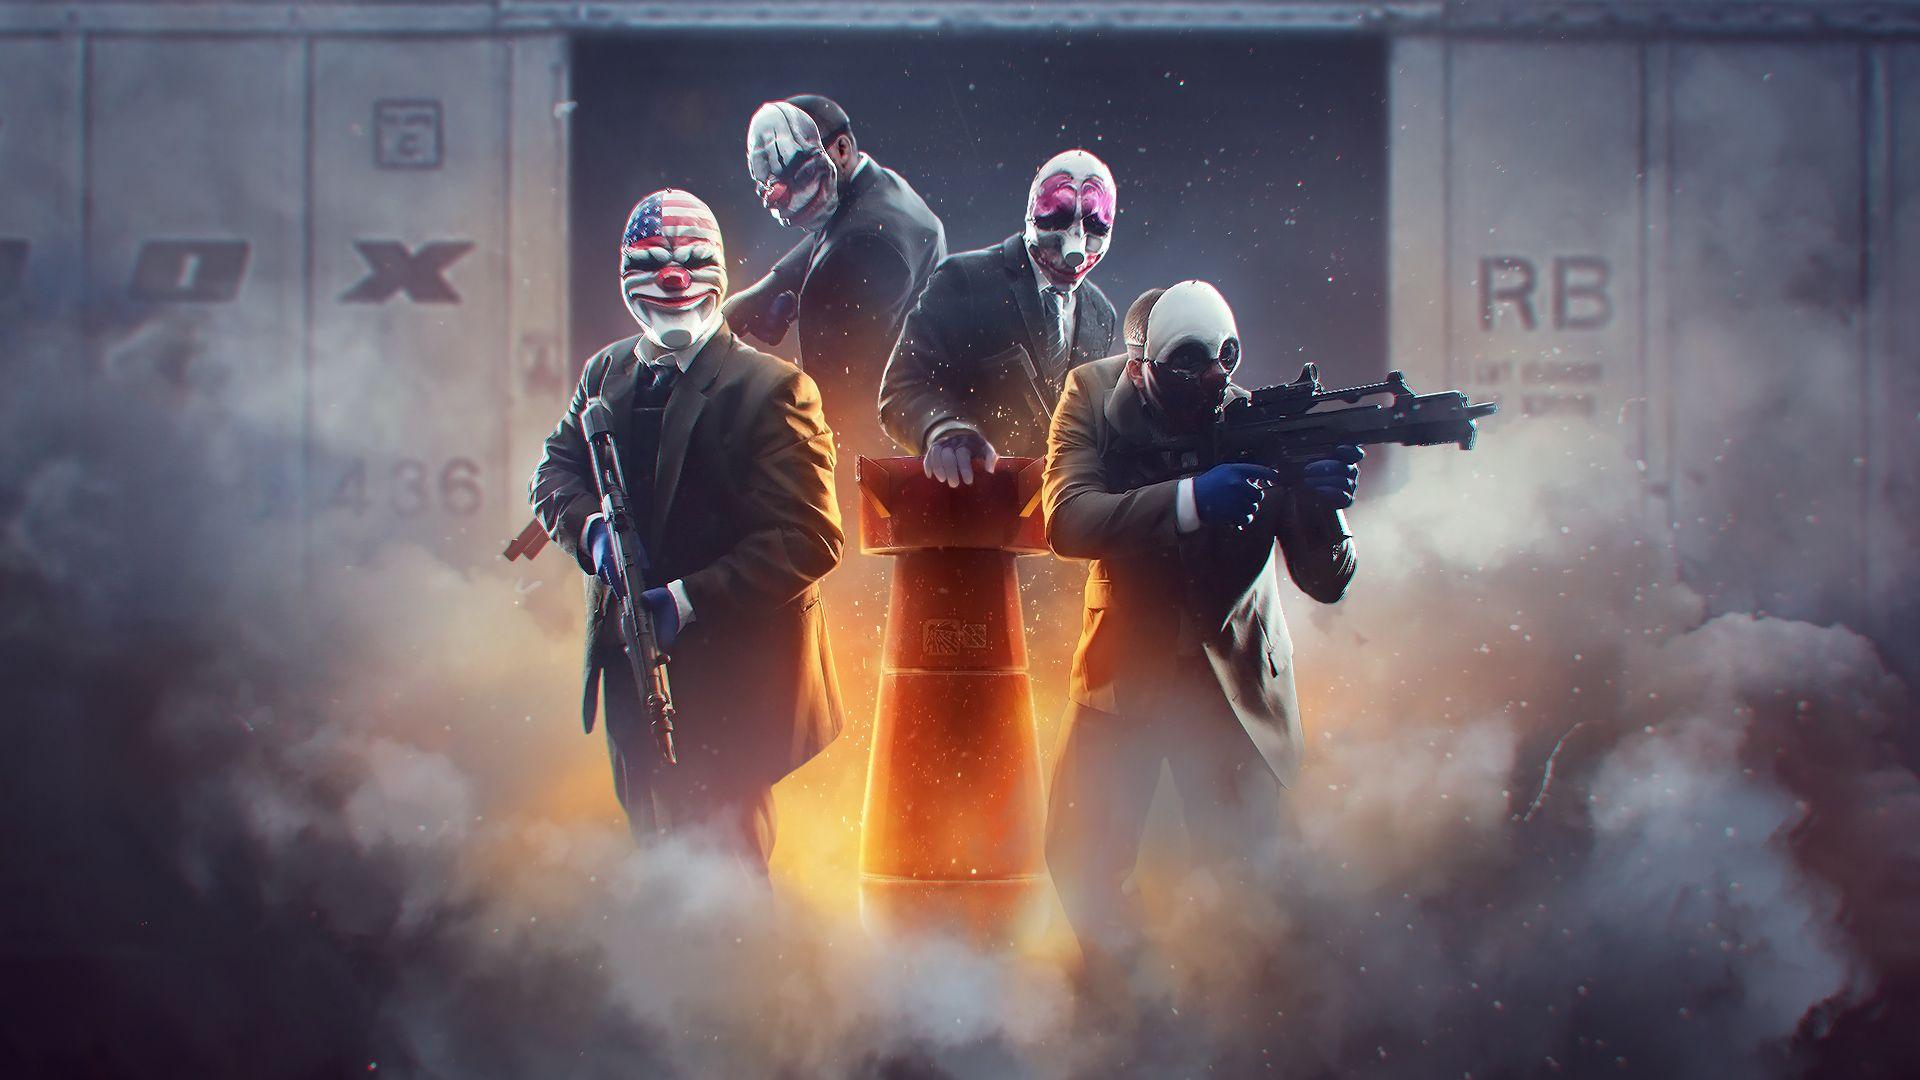 payday 2 full game free download pc